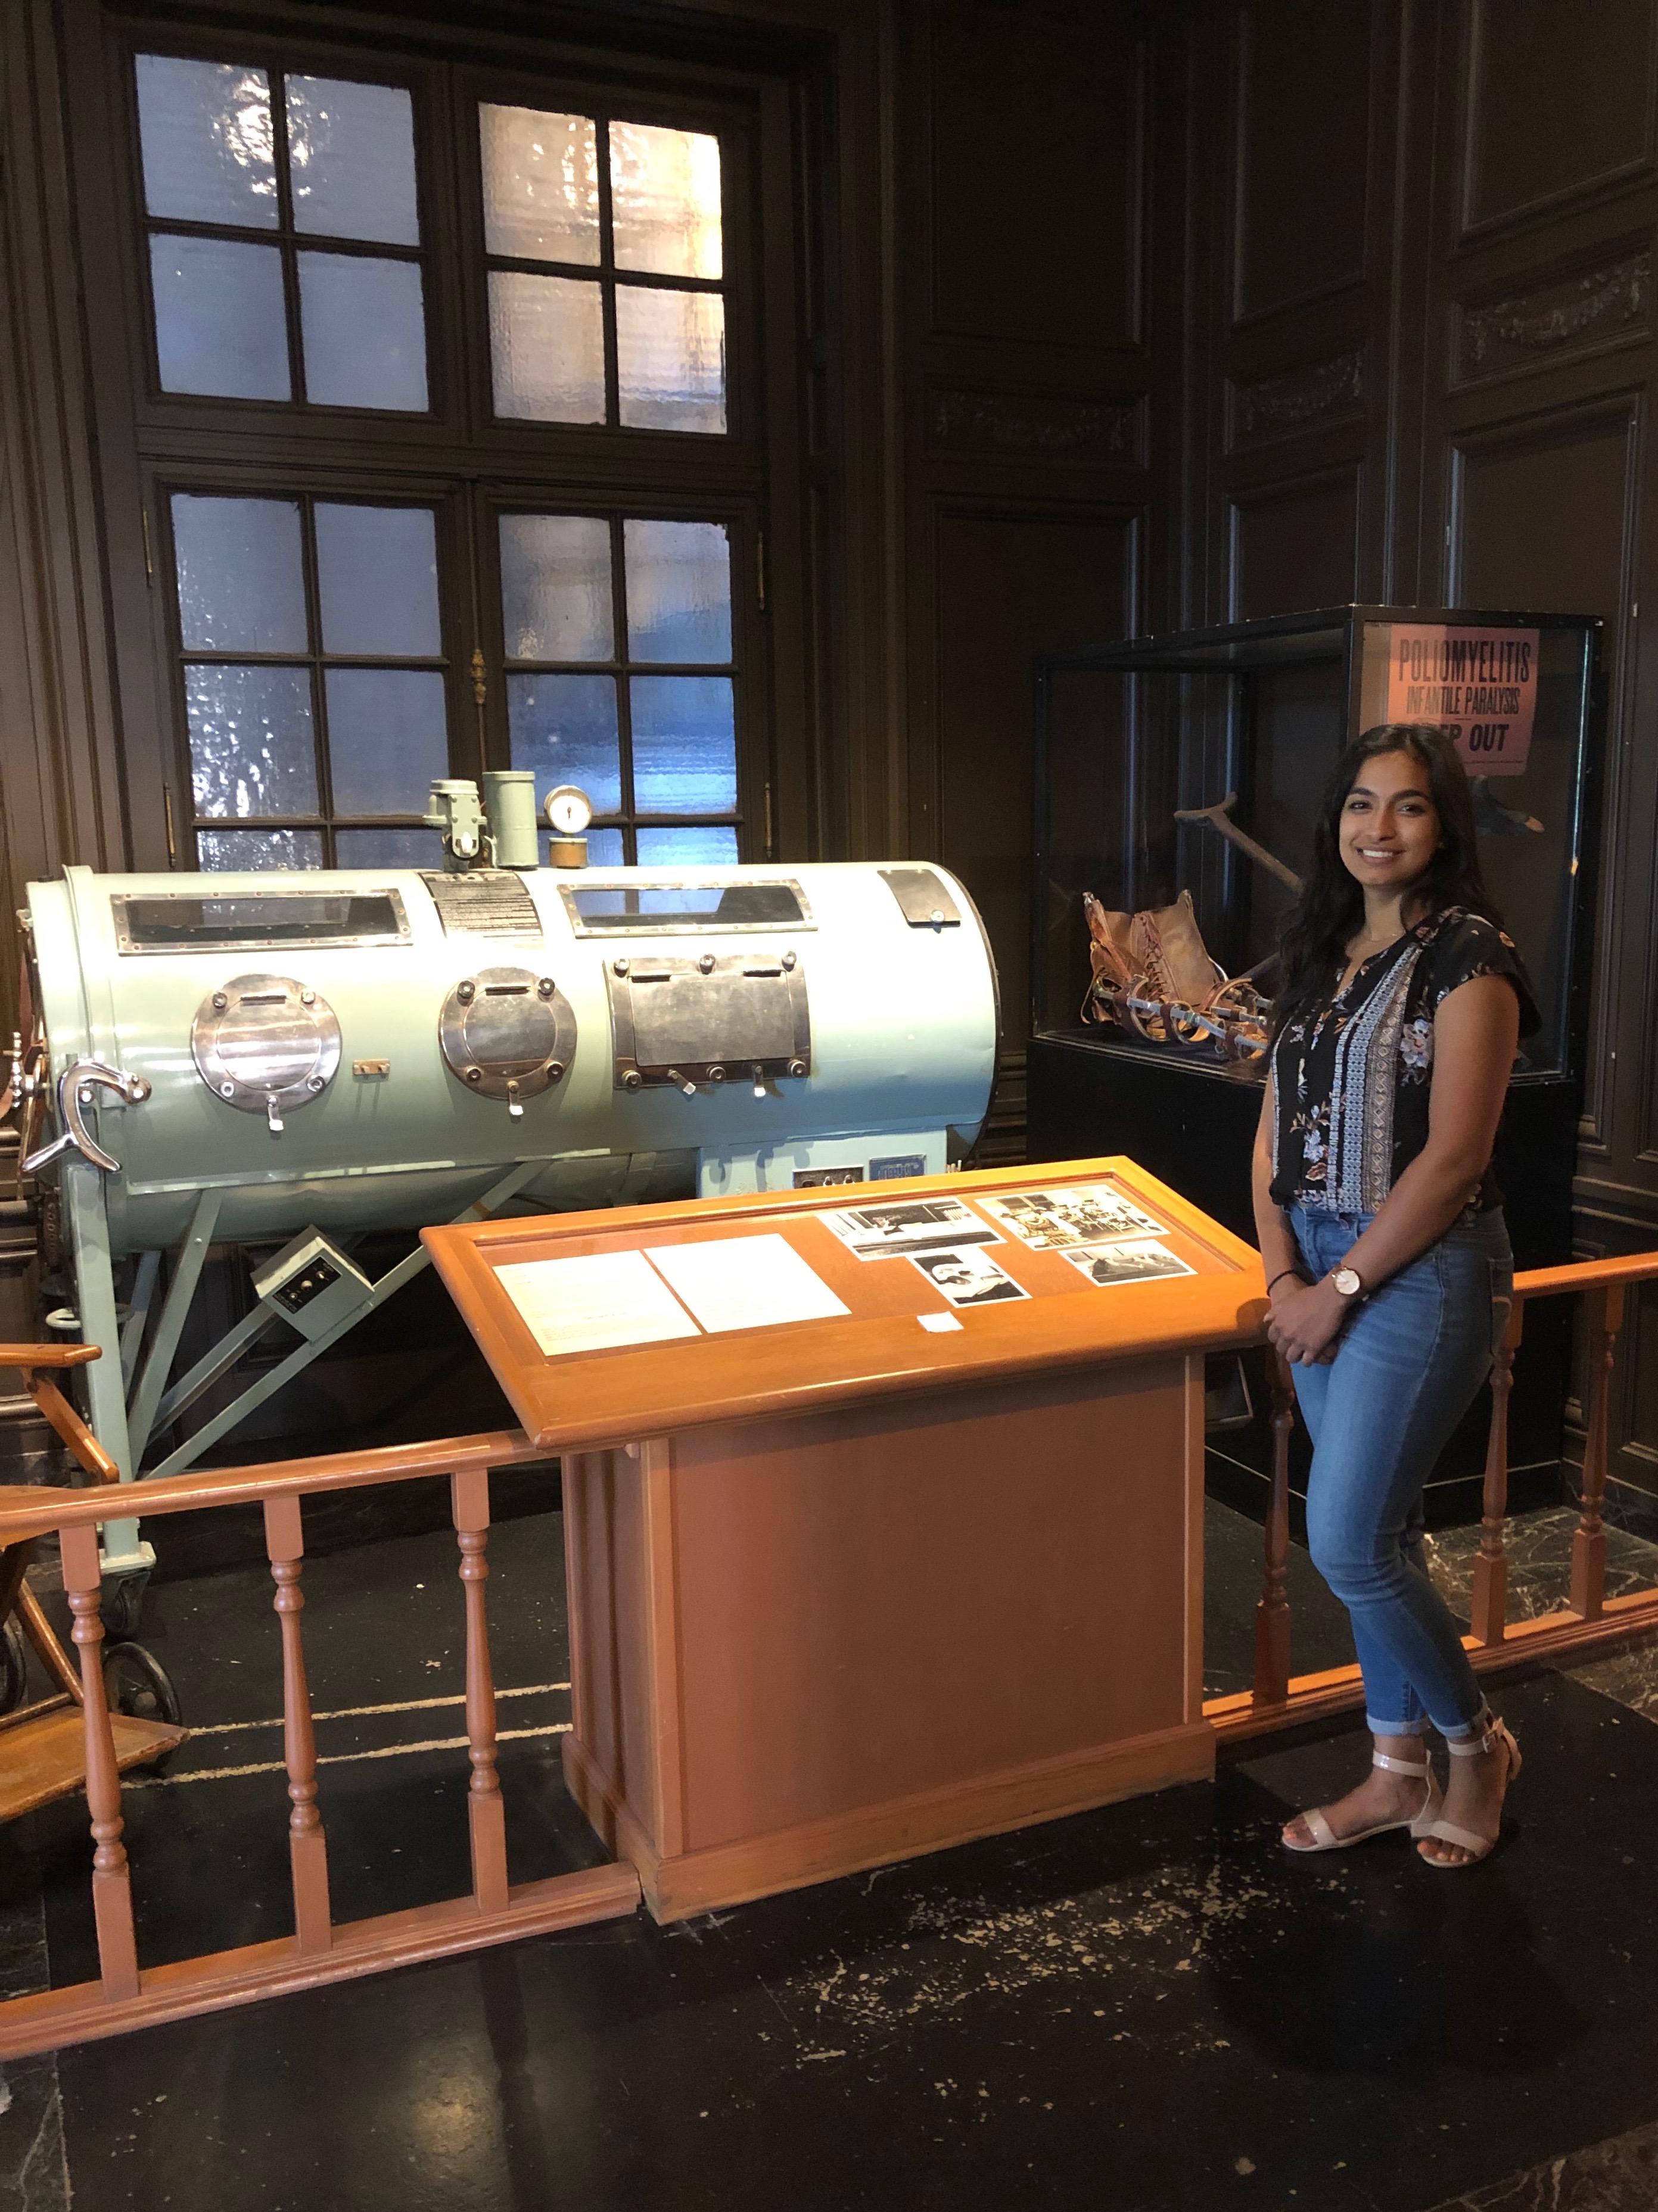 Anu standing next to the light blue iron lung displayed in the polio exhibit